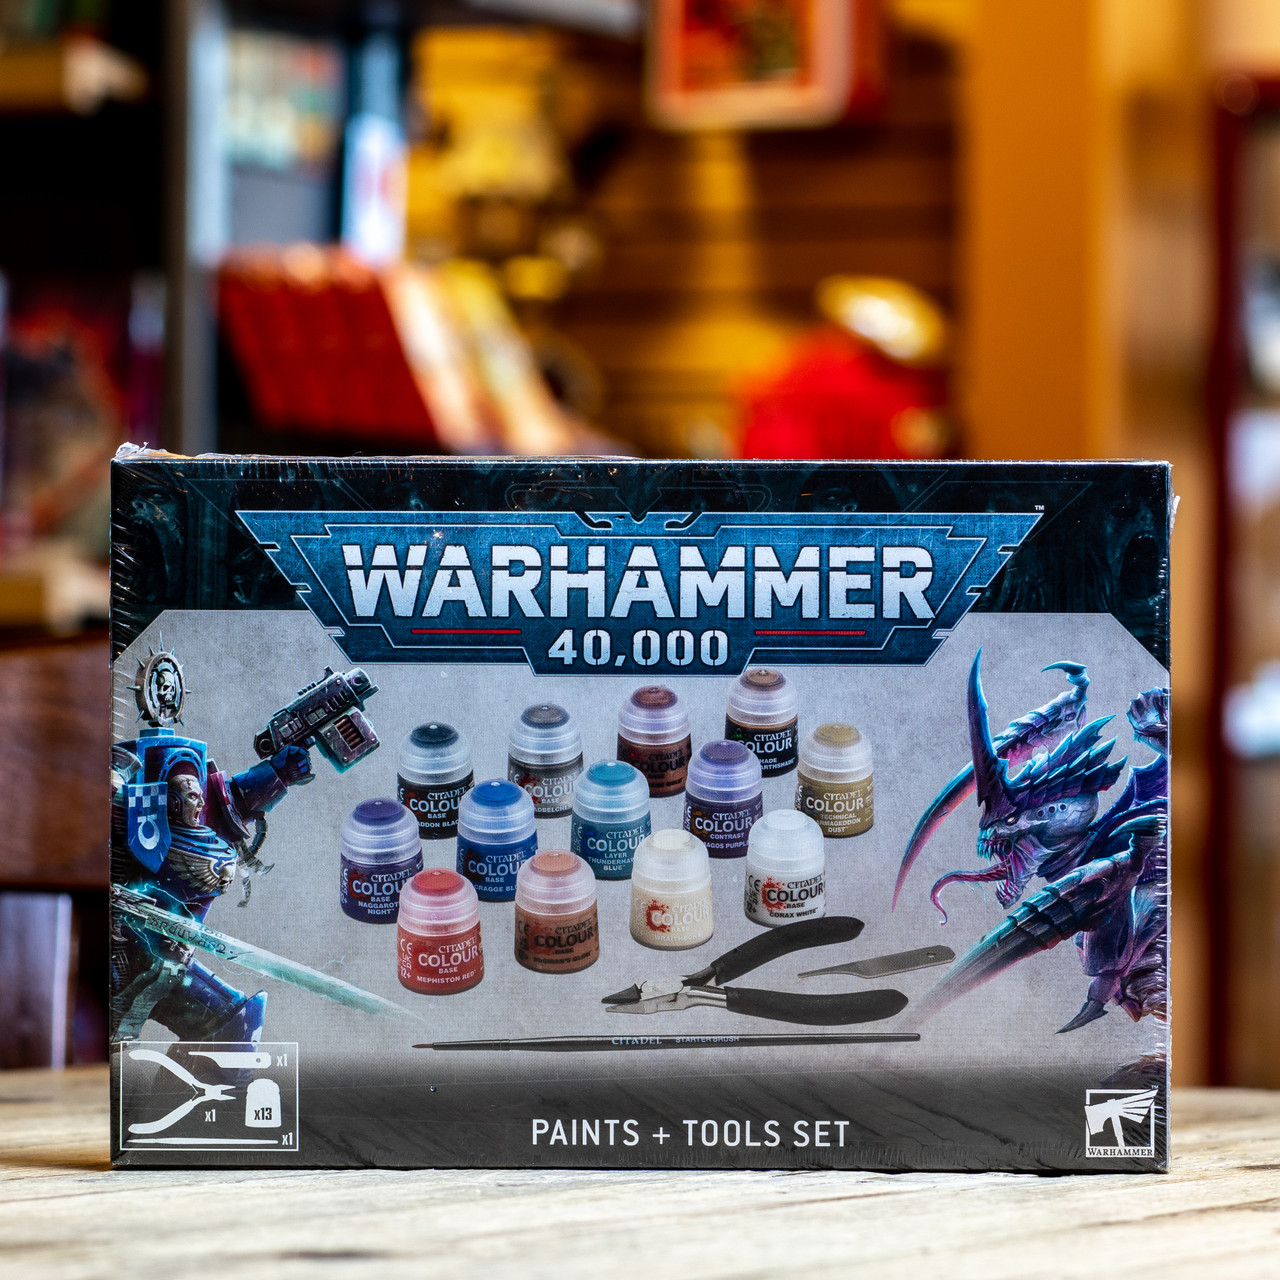 All Warhammer 40,000 Paints where to buy them in 2023